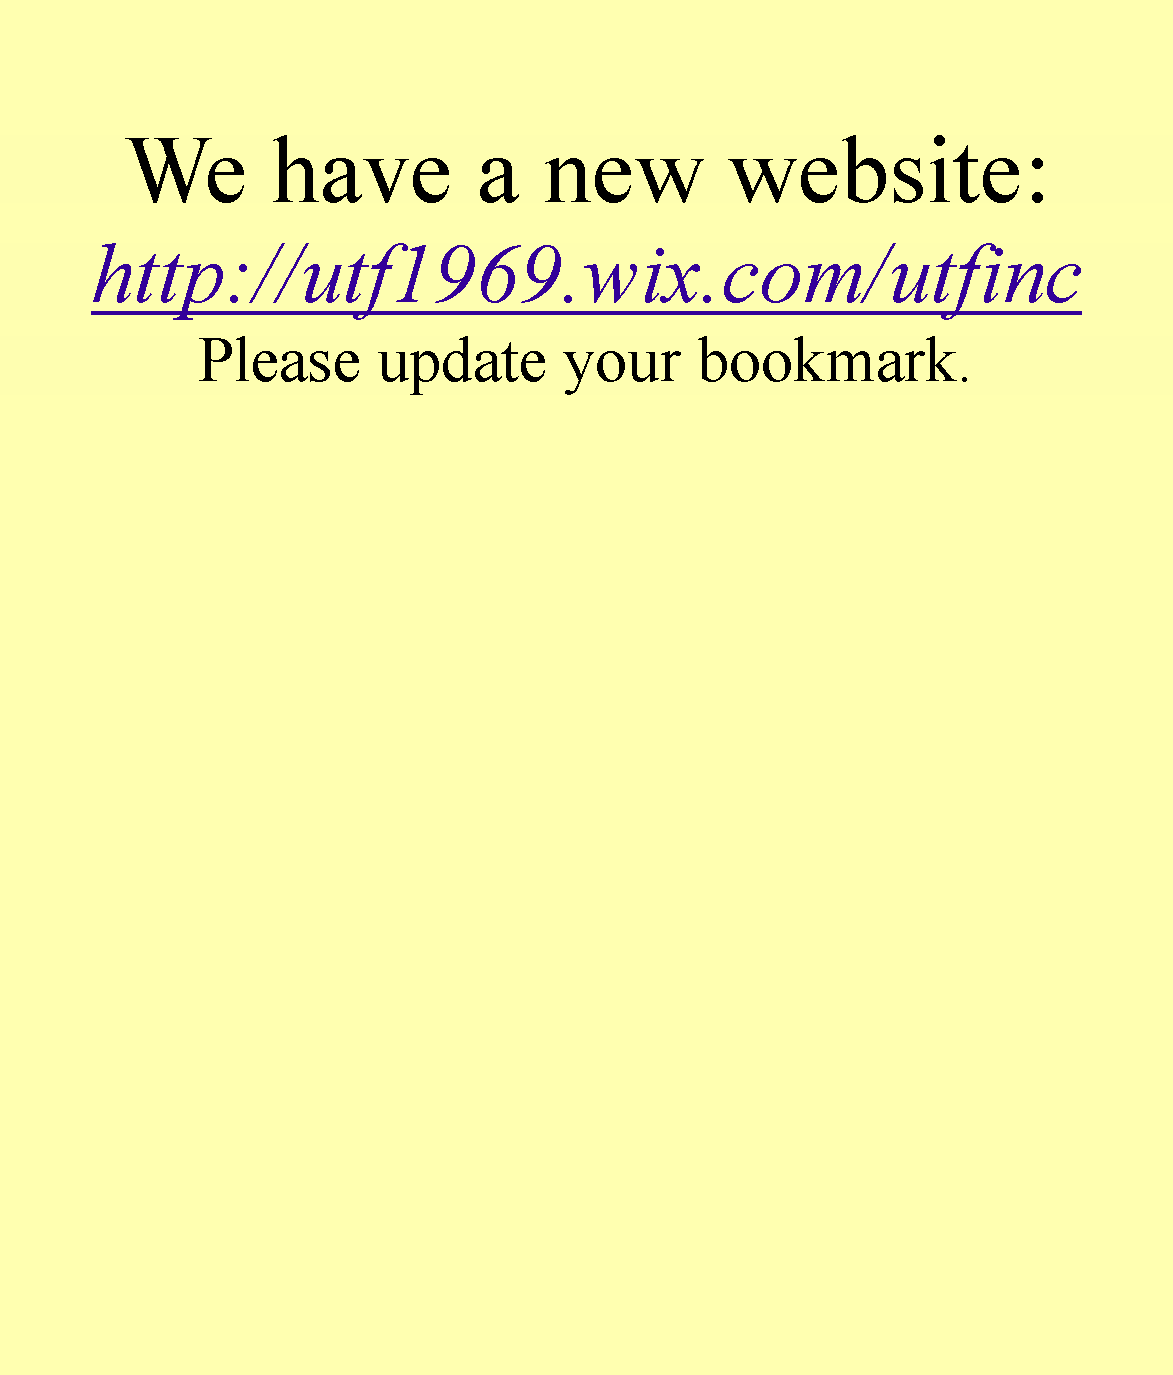 Text Box: We have a new website:http://utf1969.wix.com/utfincPlease update your bookmark.